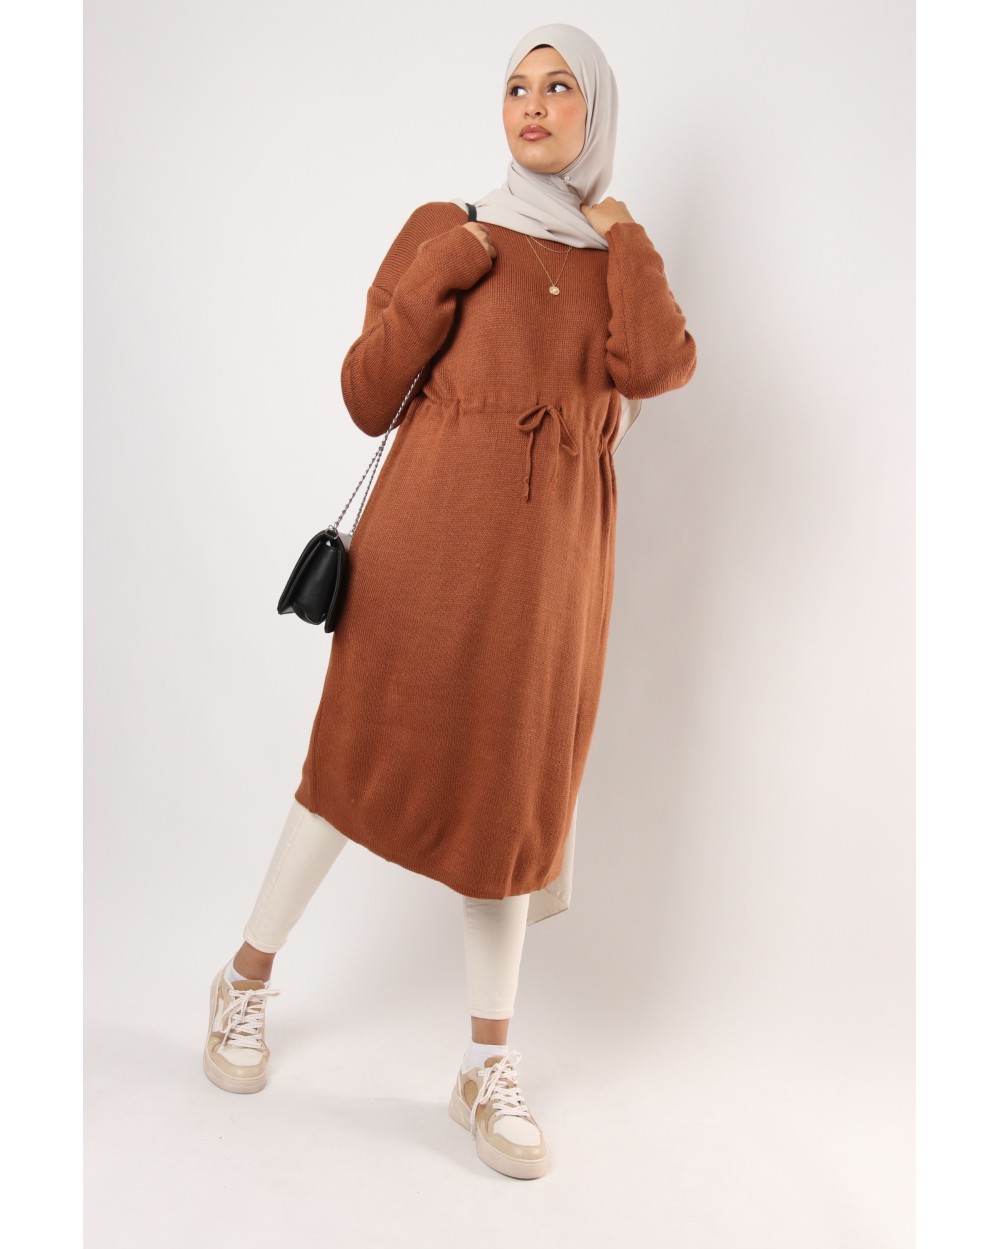 Trianito sweater tunic with drawcord